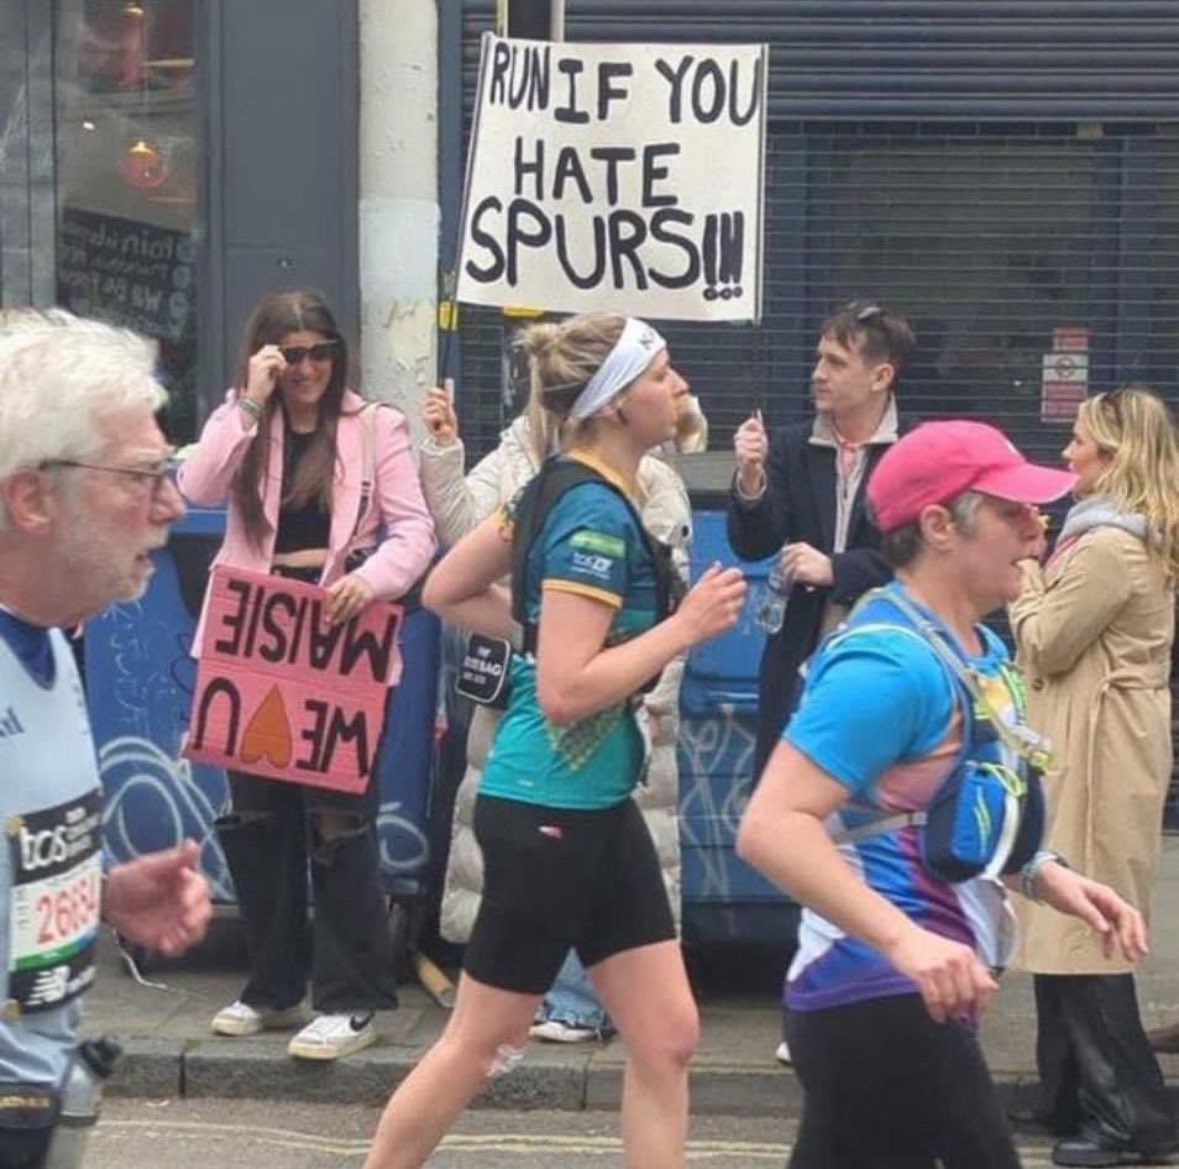 Spotted at the marathon yesterday 😆